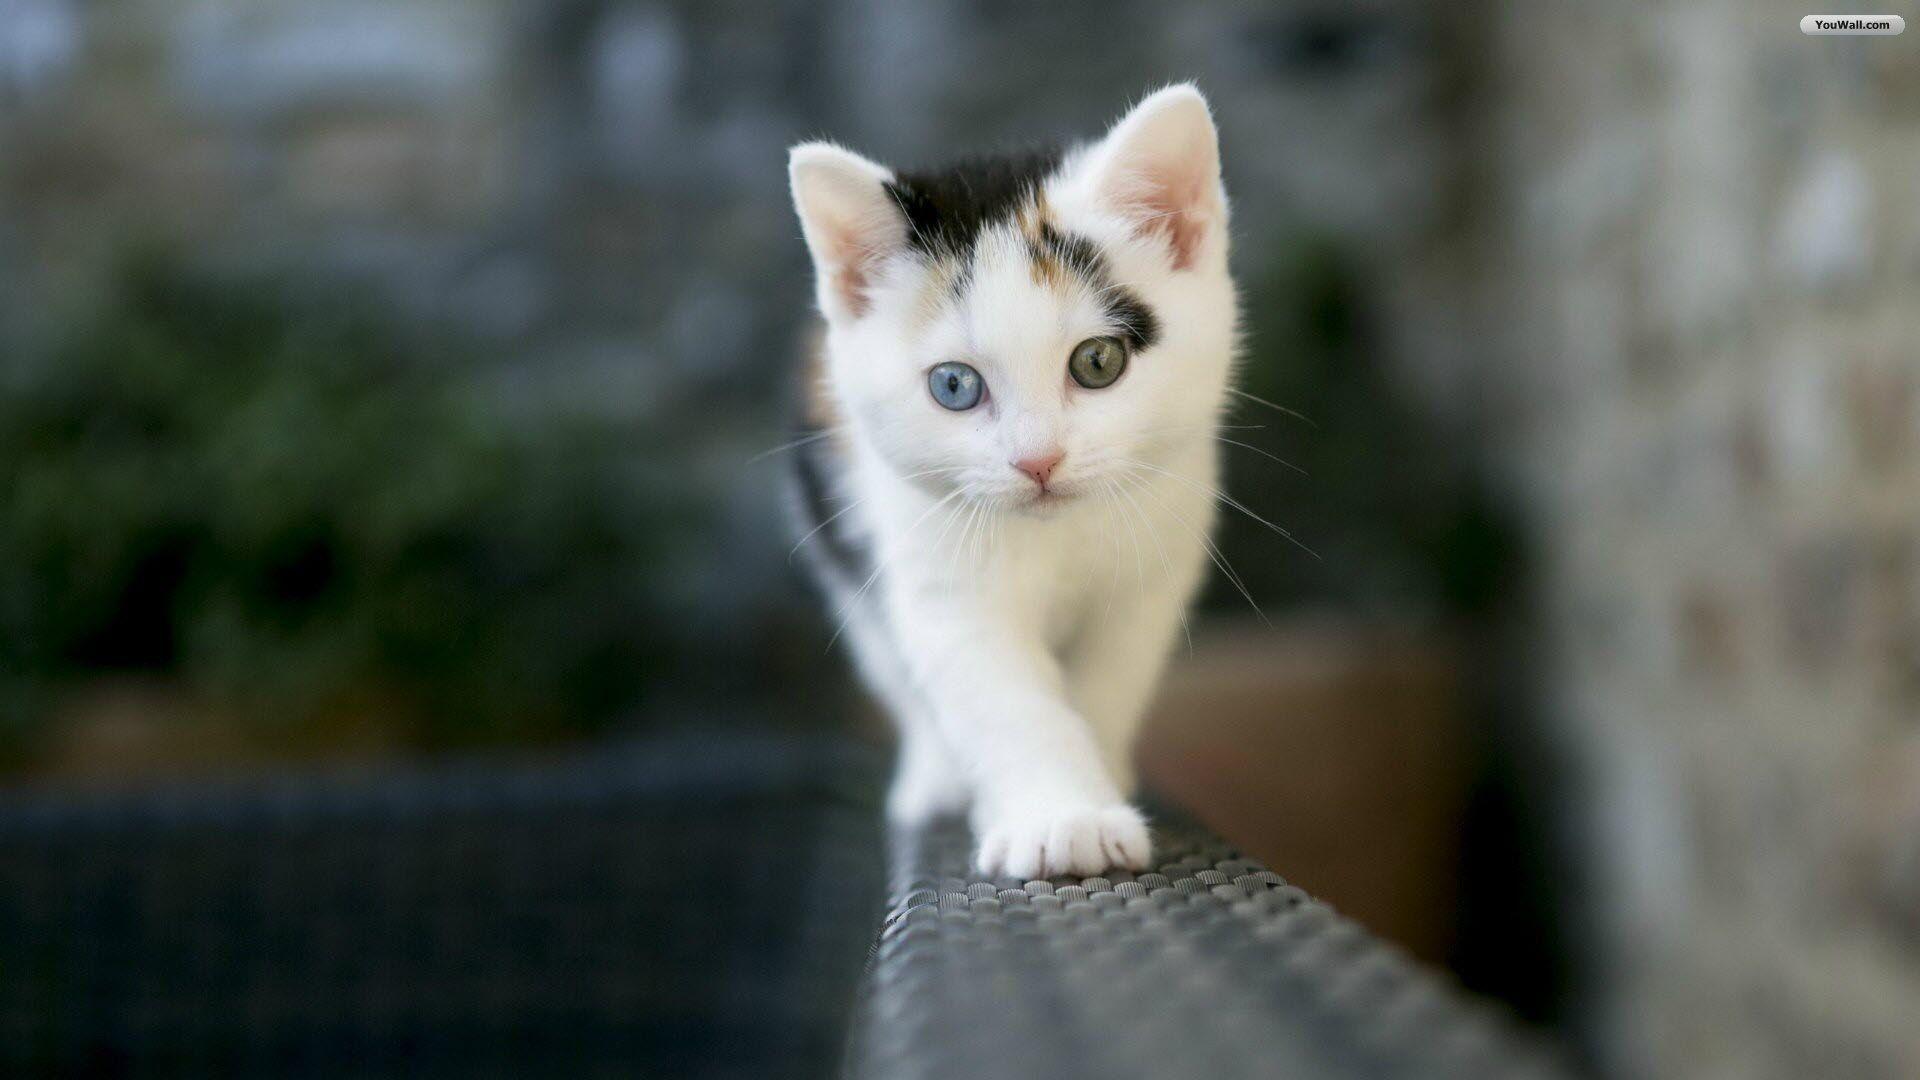 Cute White Cat Wallpaper For Desktop High Quality HD Animals Of